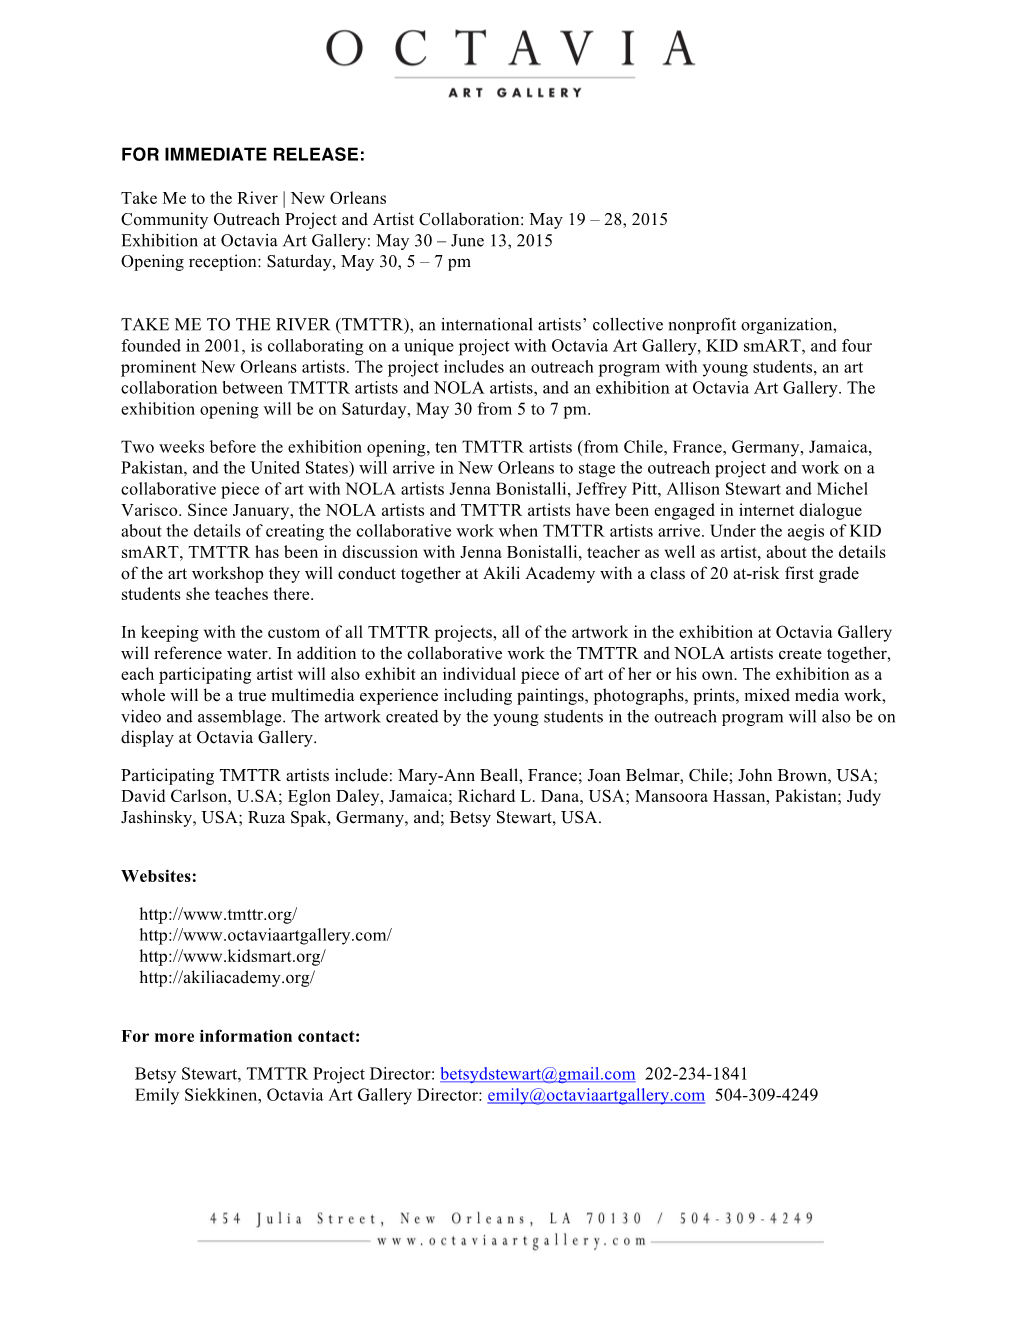 Press Release for TMTTR.Comments 2